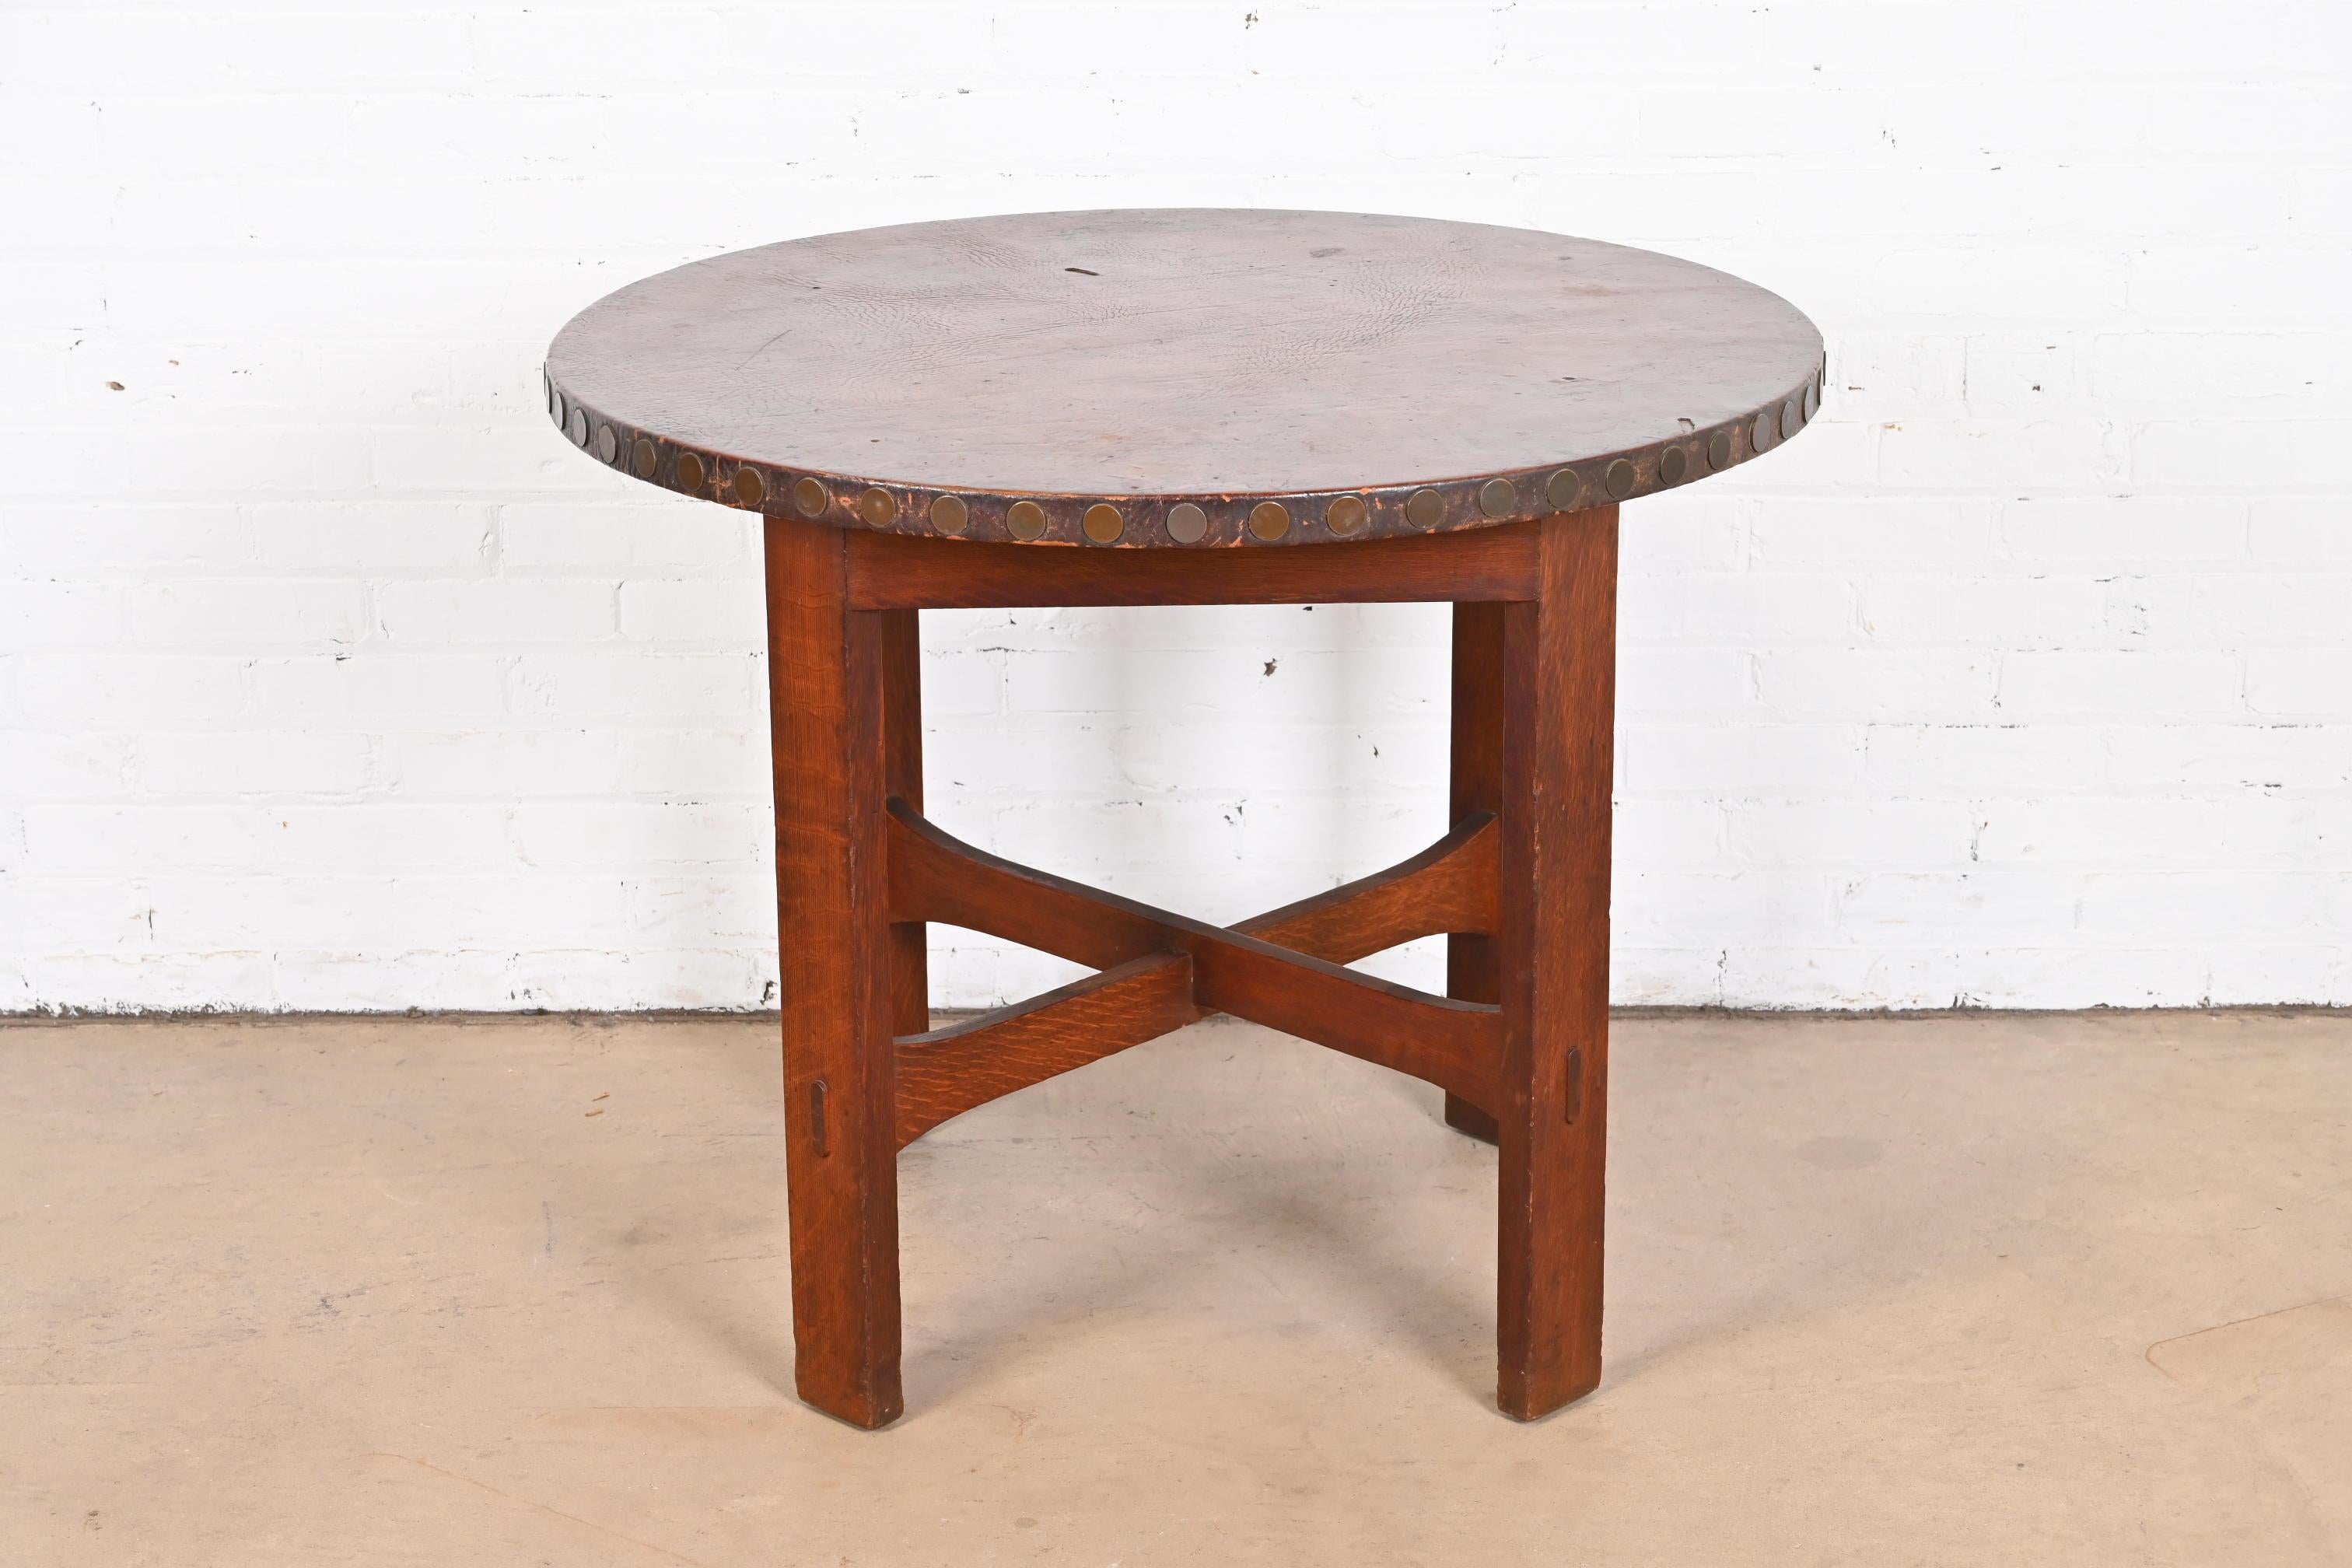 A gorgeous antique Mission or Arts & Crafts center table, lamp table or occasional side table

By Stickley Brothers, Model No. 180

USA, Circa 1900

Solid quarter sawn oak, with original Spanish Morocco leather top and hammered copper